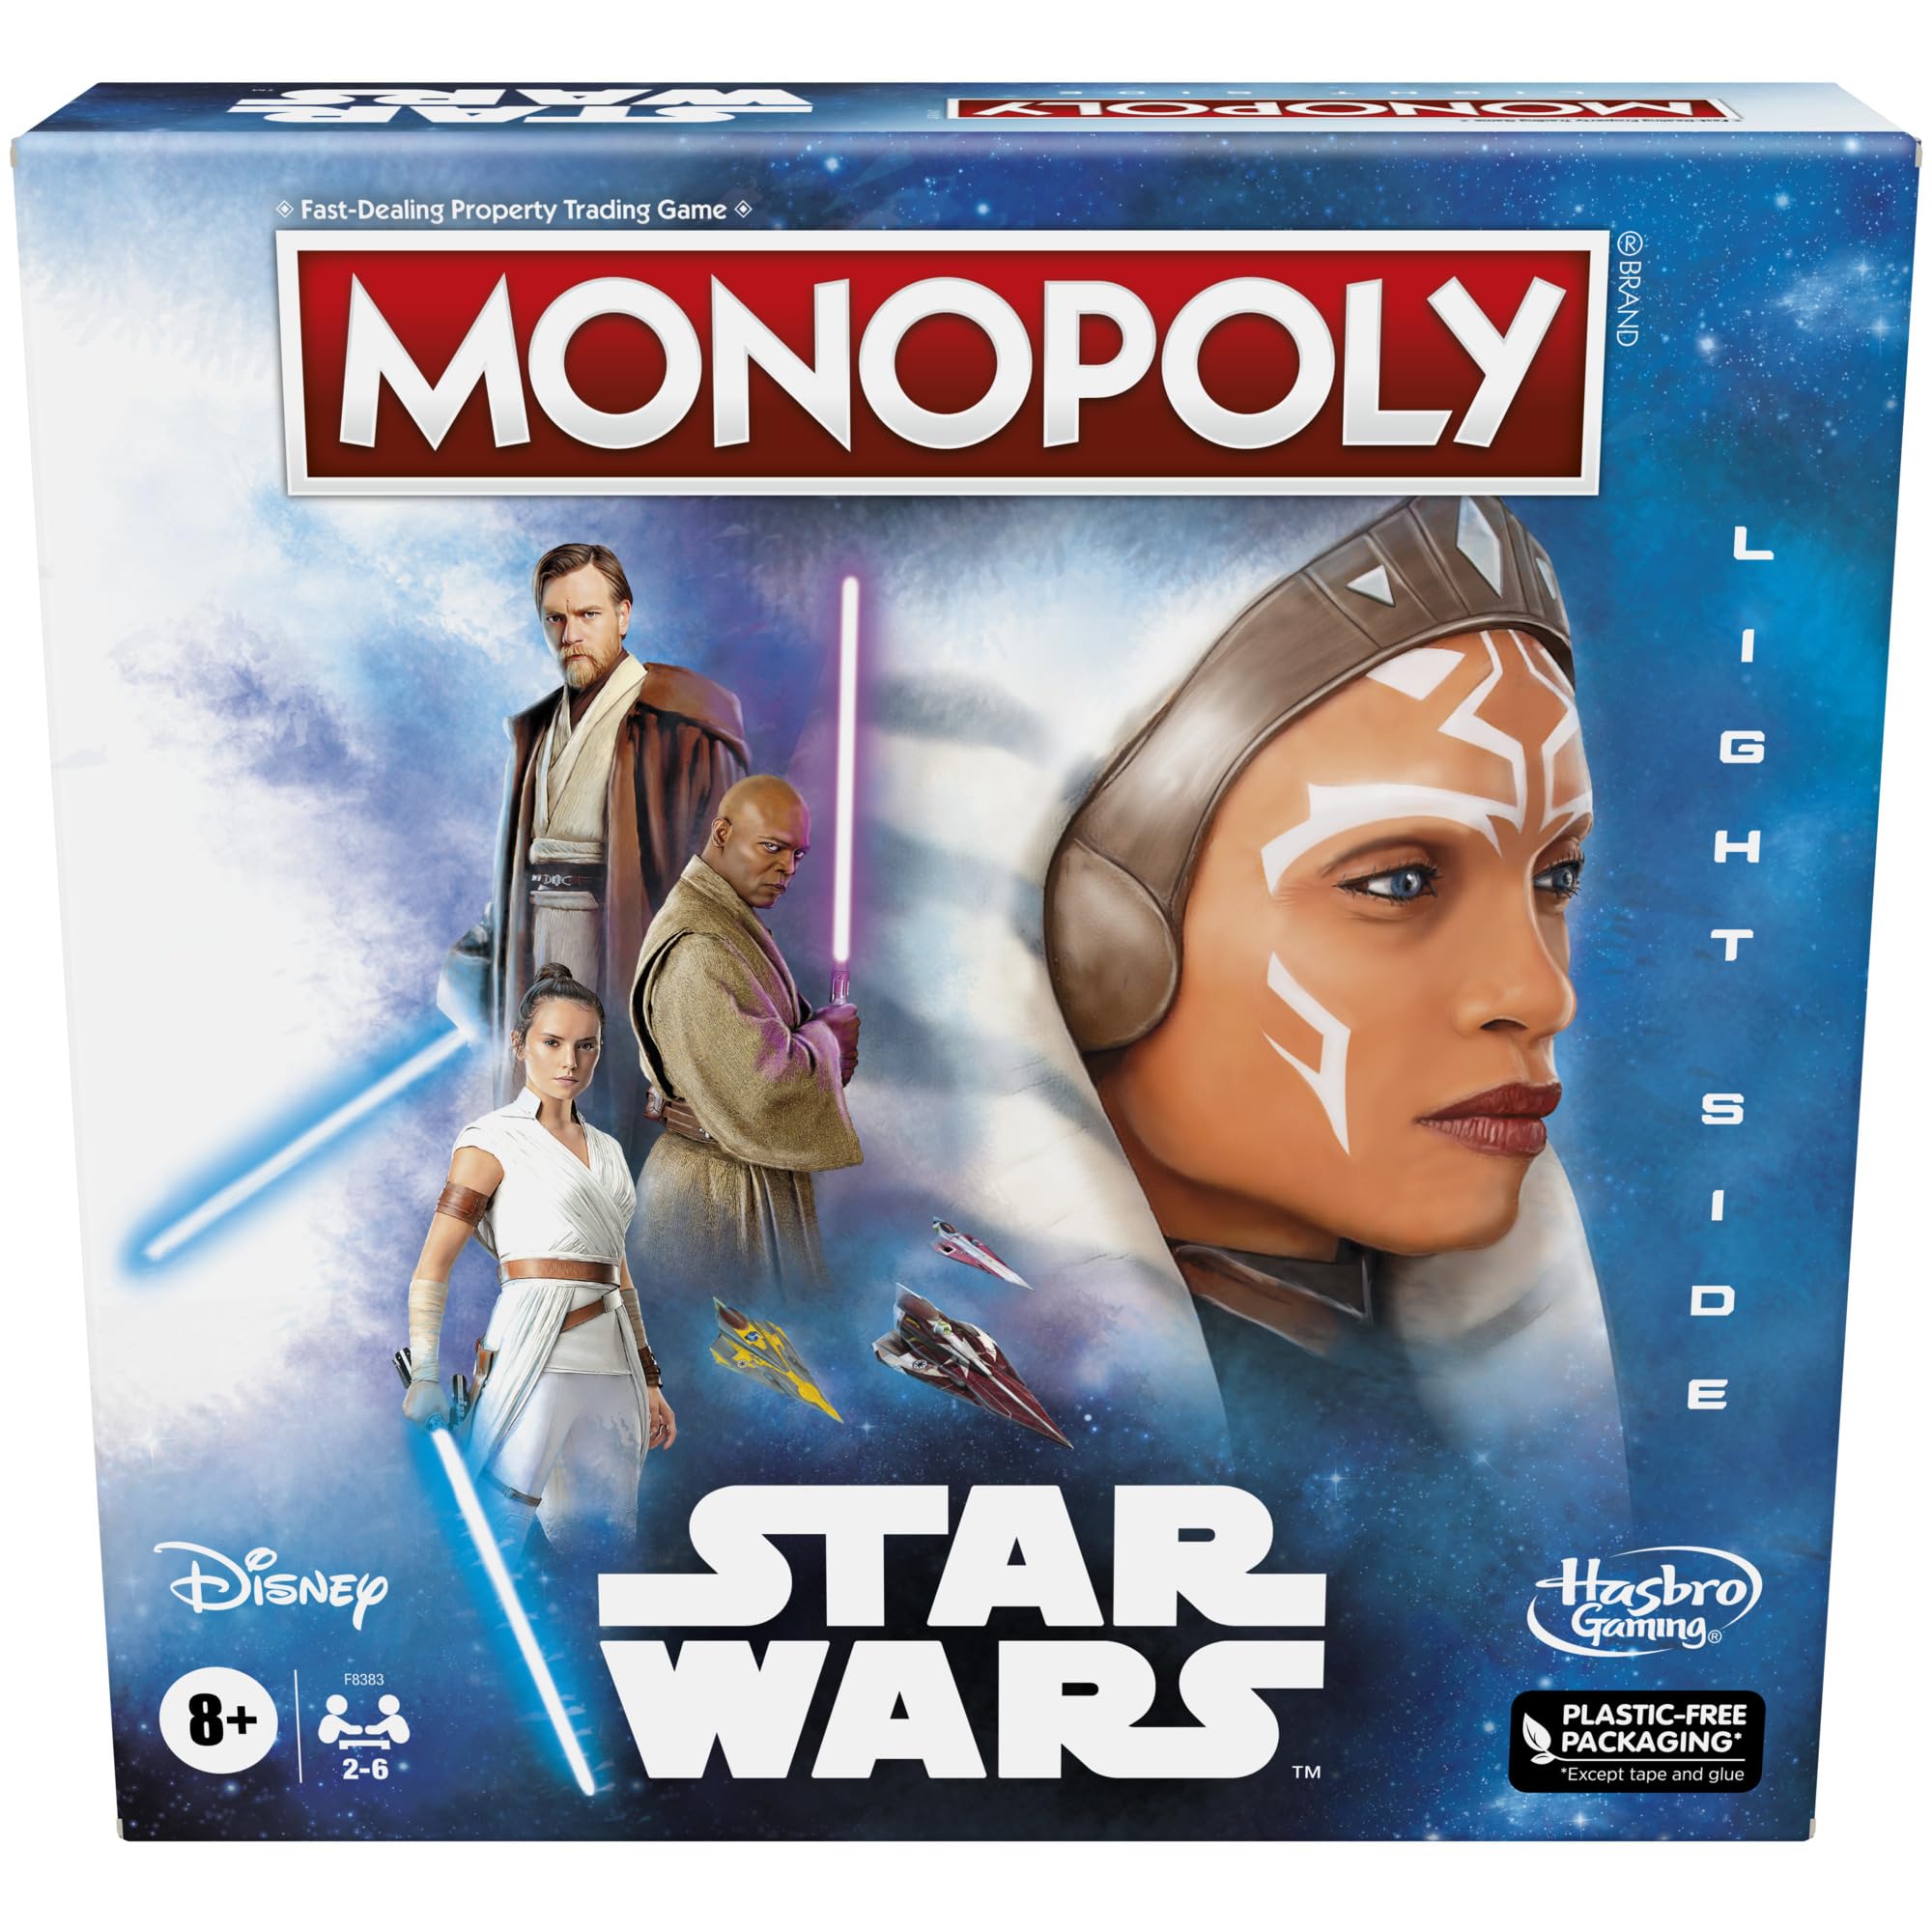 Monopoly: Star Wars Light Side Edition Board Game for Families and Kids Ages 8 and Up, Star Wars Jedi Game for 2-6 Players, Family Games